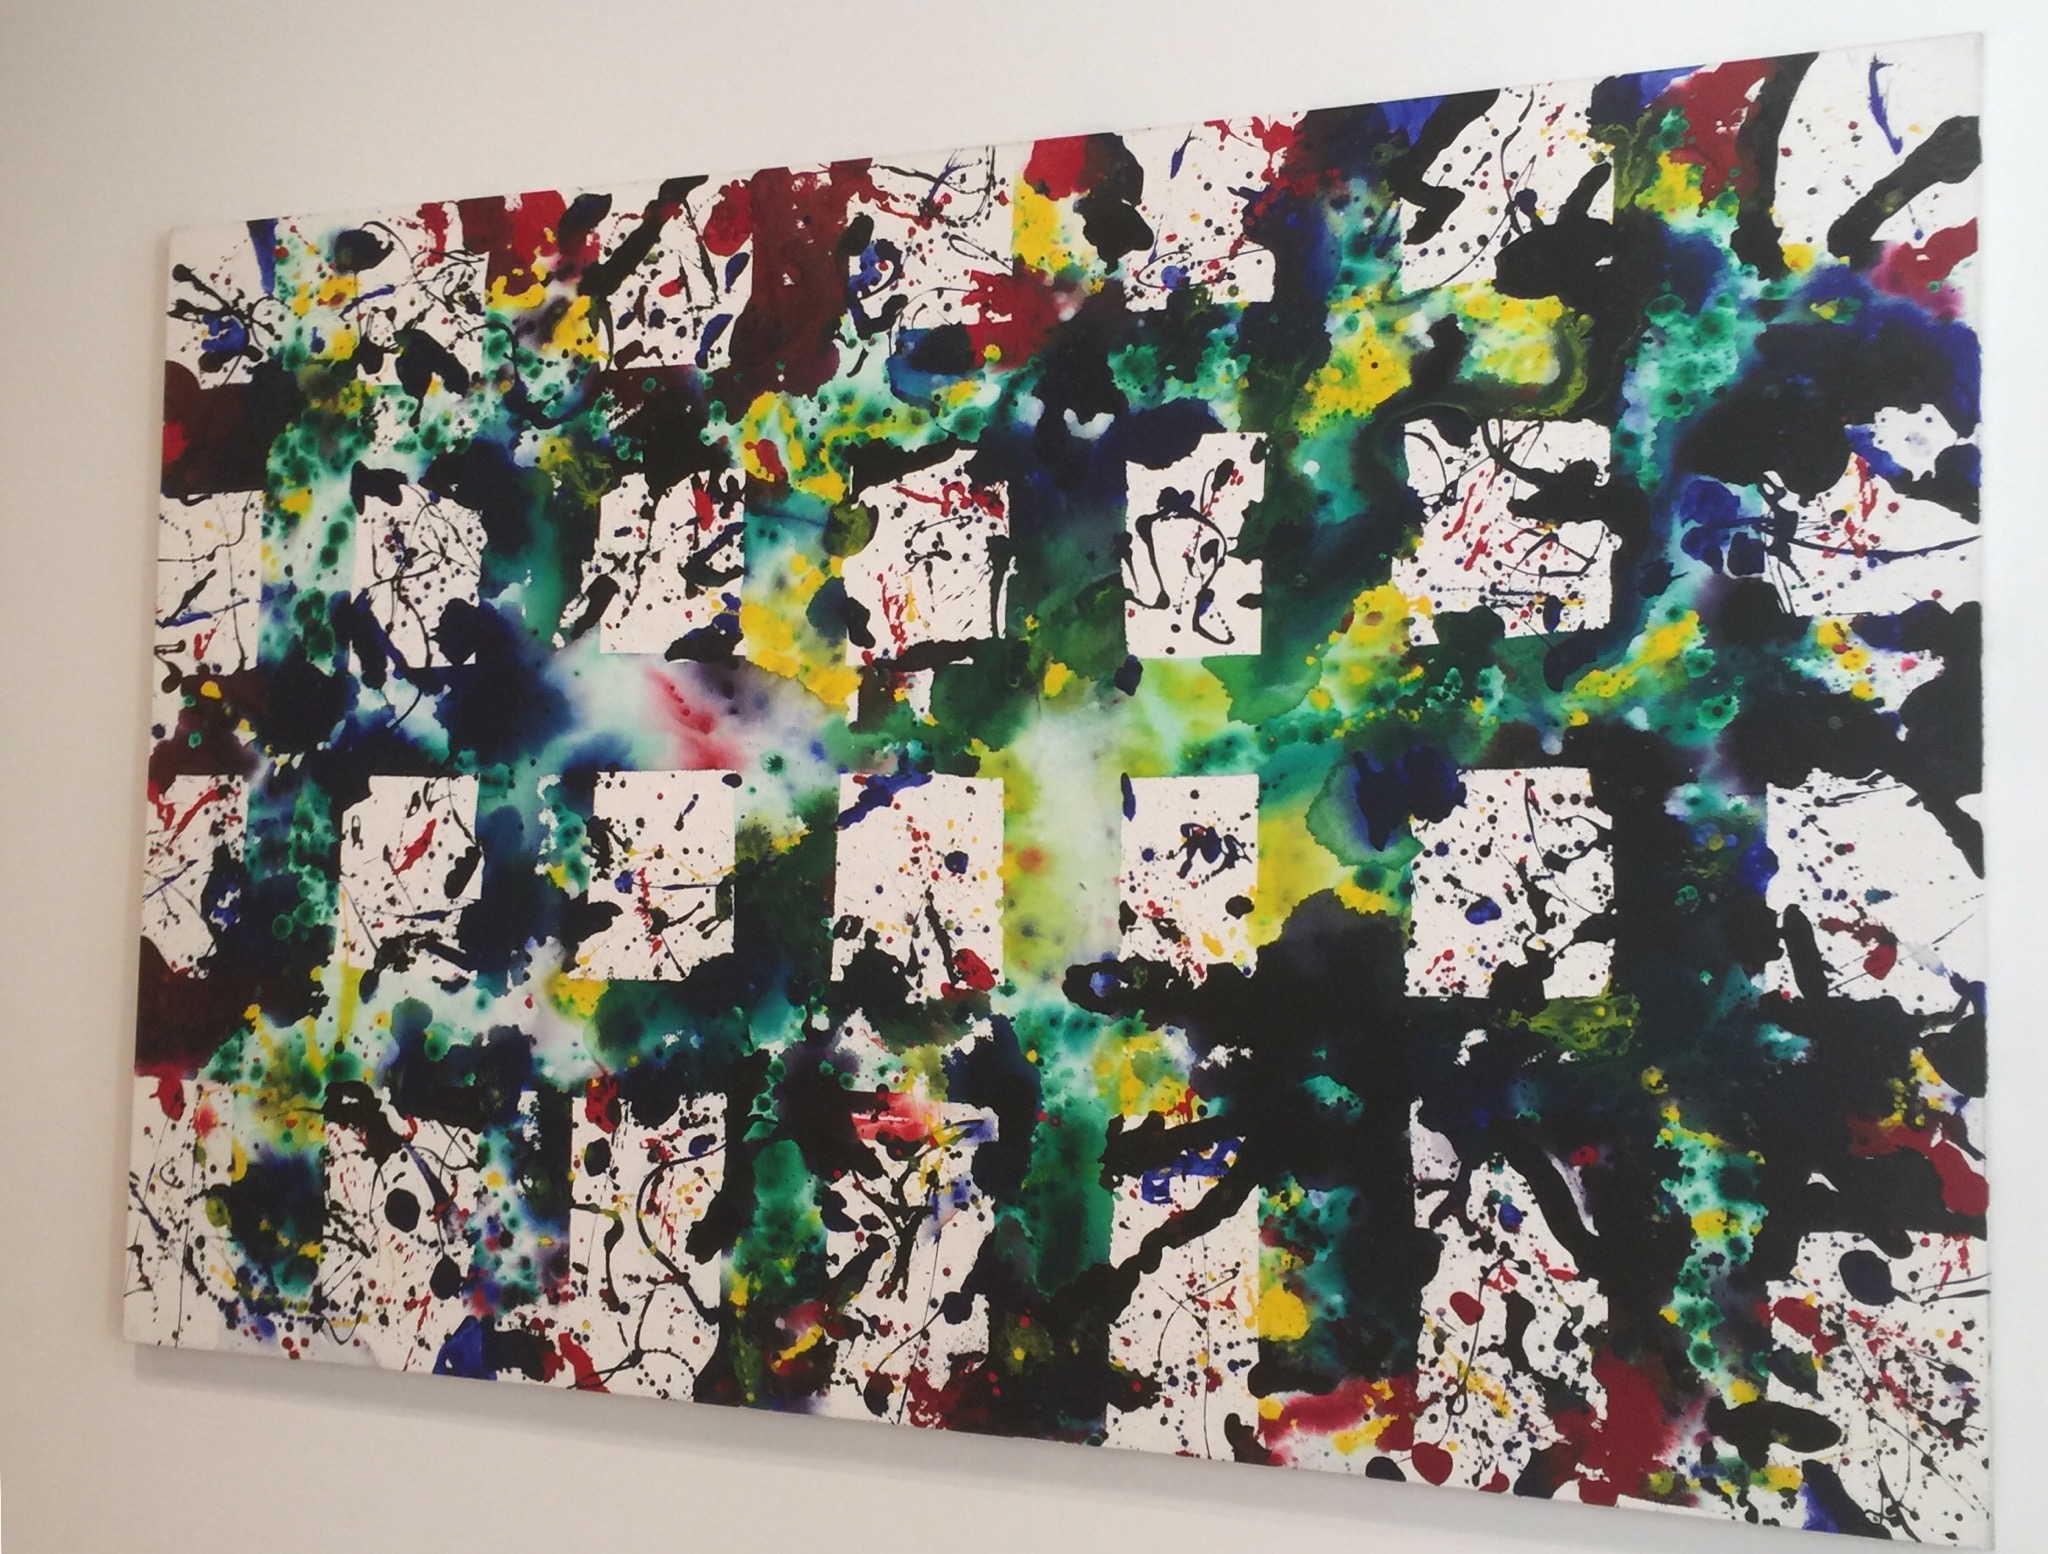 A painting with a white grid of squares and colors exploding from between them